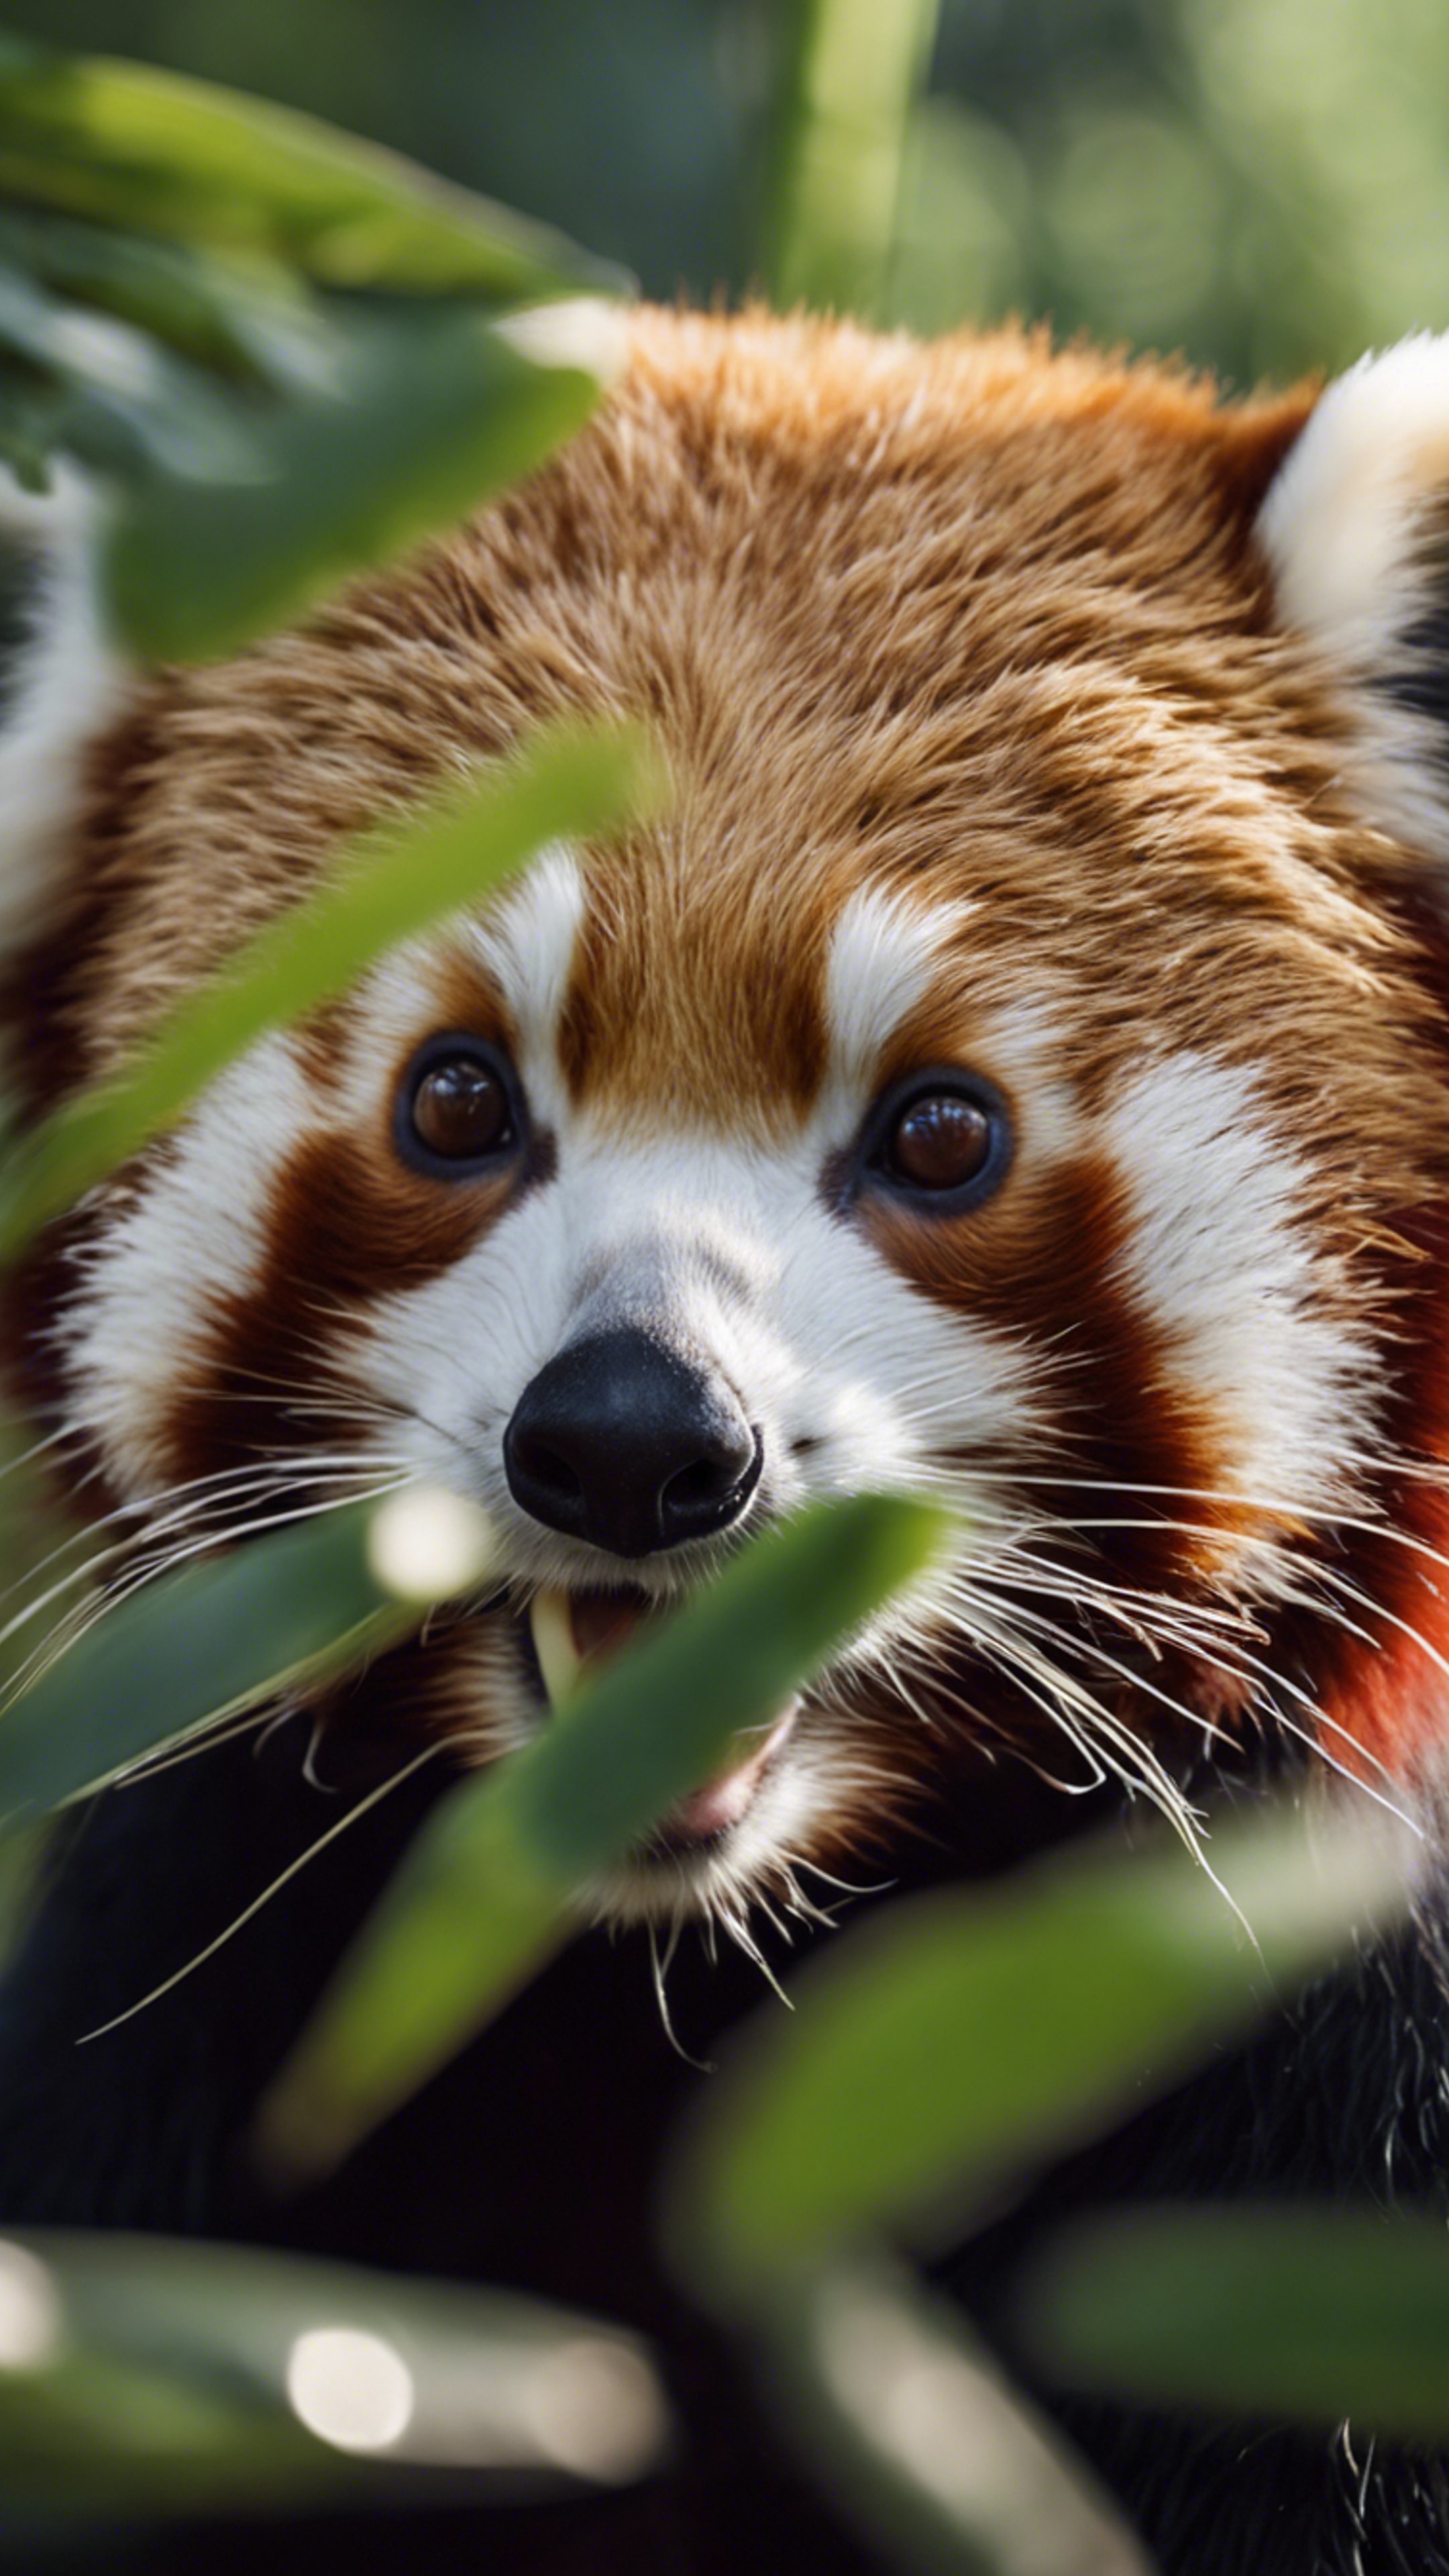 A close-up of a red panda munching on bamboo leaves壁紙[20c4a1c4fccc4fa88325]